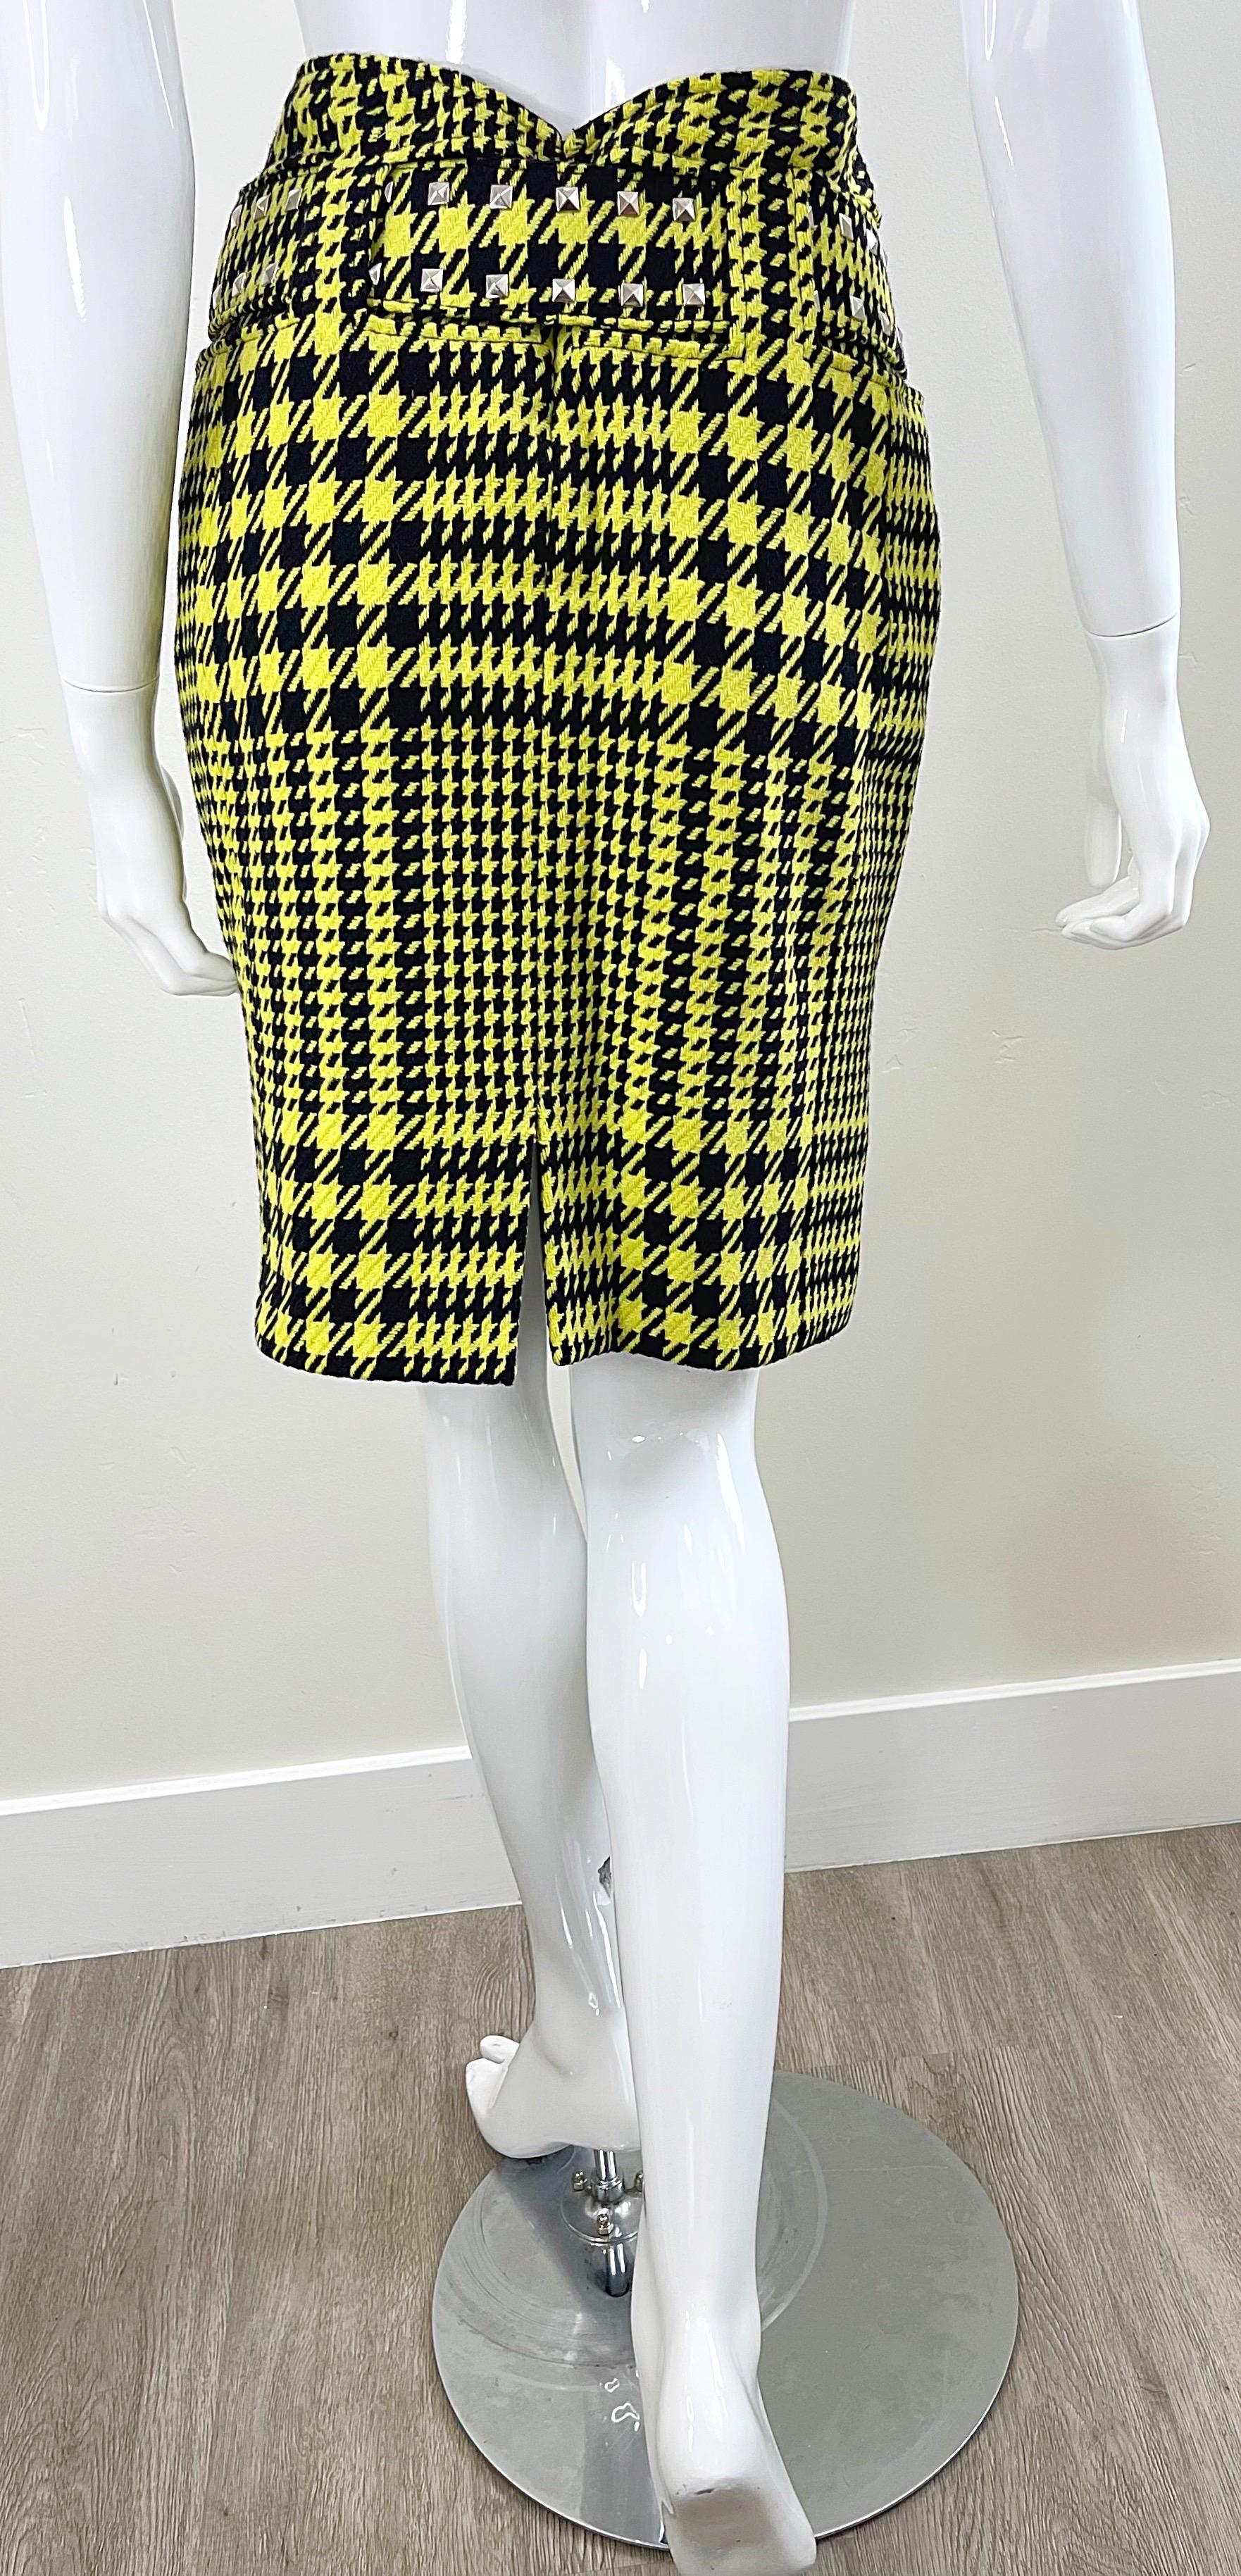 Gianni Versace Fall 2004 Runway Size 8 Yellow Black Houndstooth Belted Skirt For Sale 11